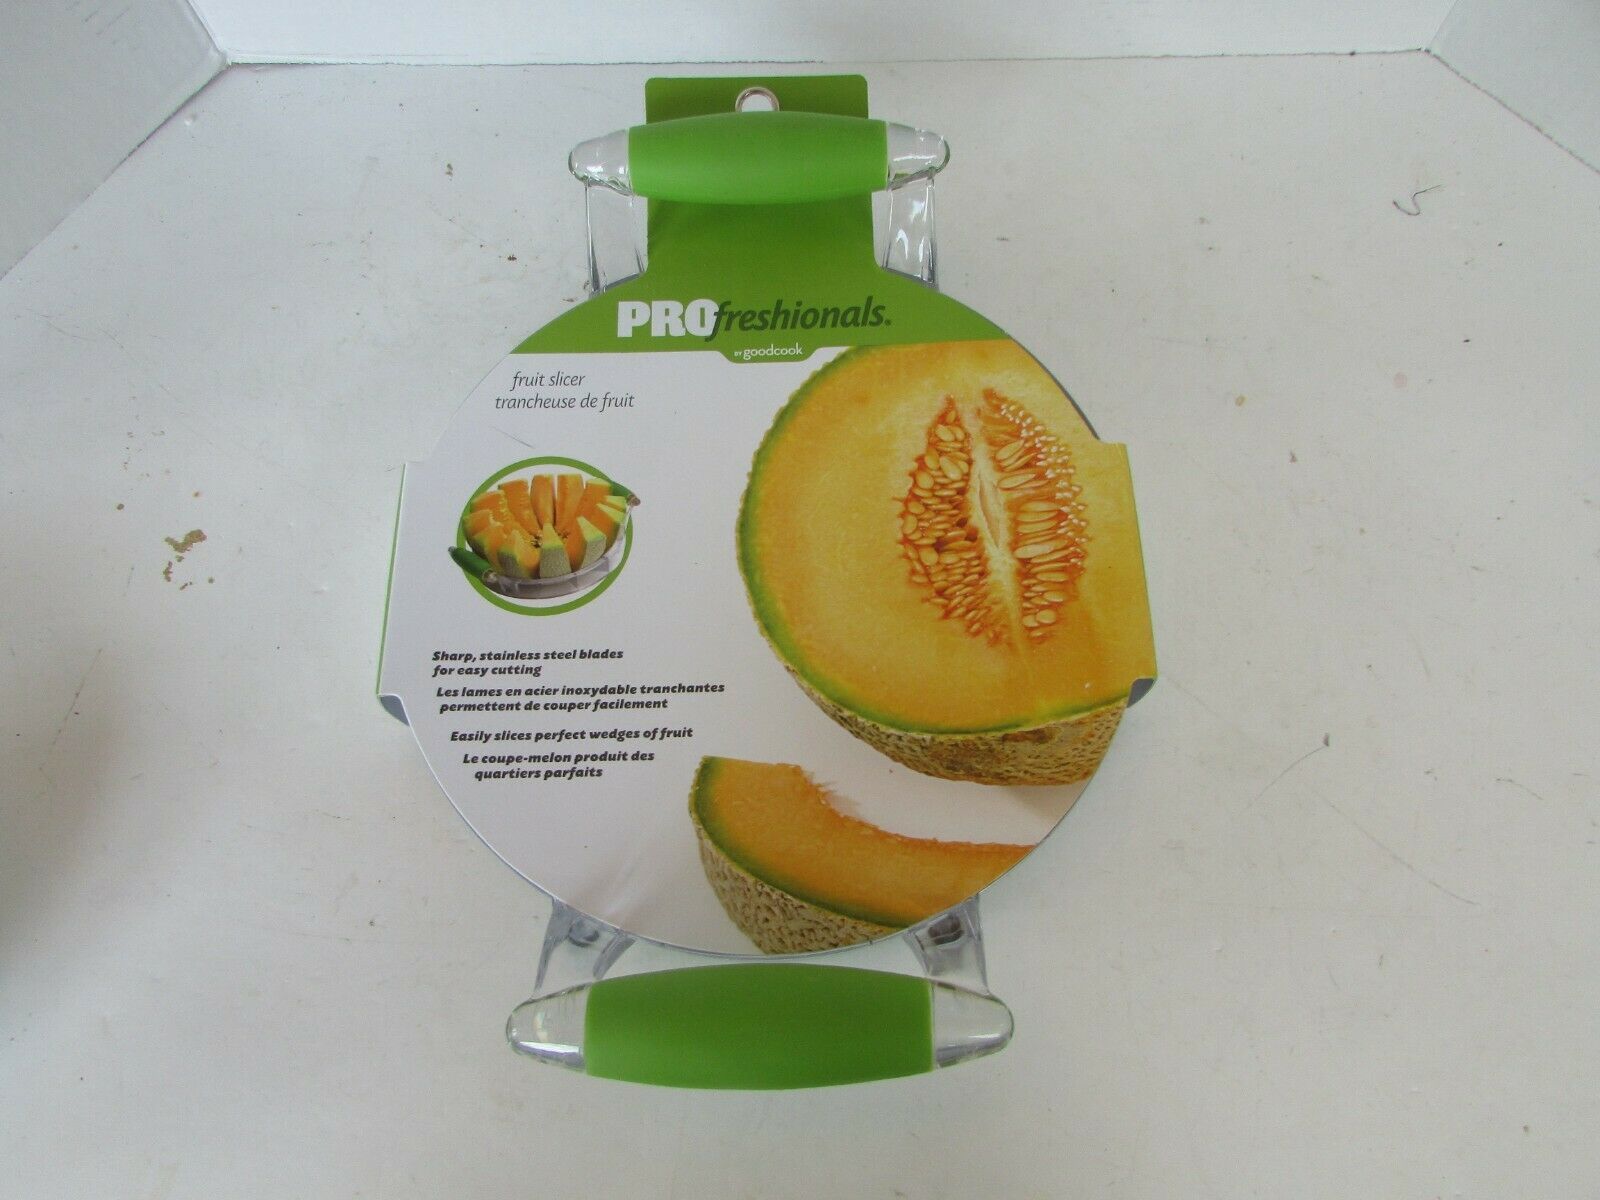 PRO FRESHIONALS FRUIT SLICER BY GOODCOOK STAINLESS STEEL BLADES EASY TO USE NEW - $14.80